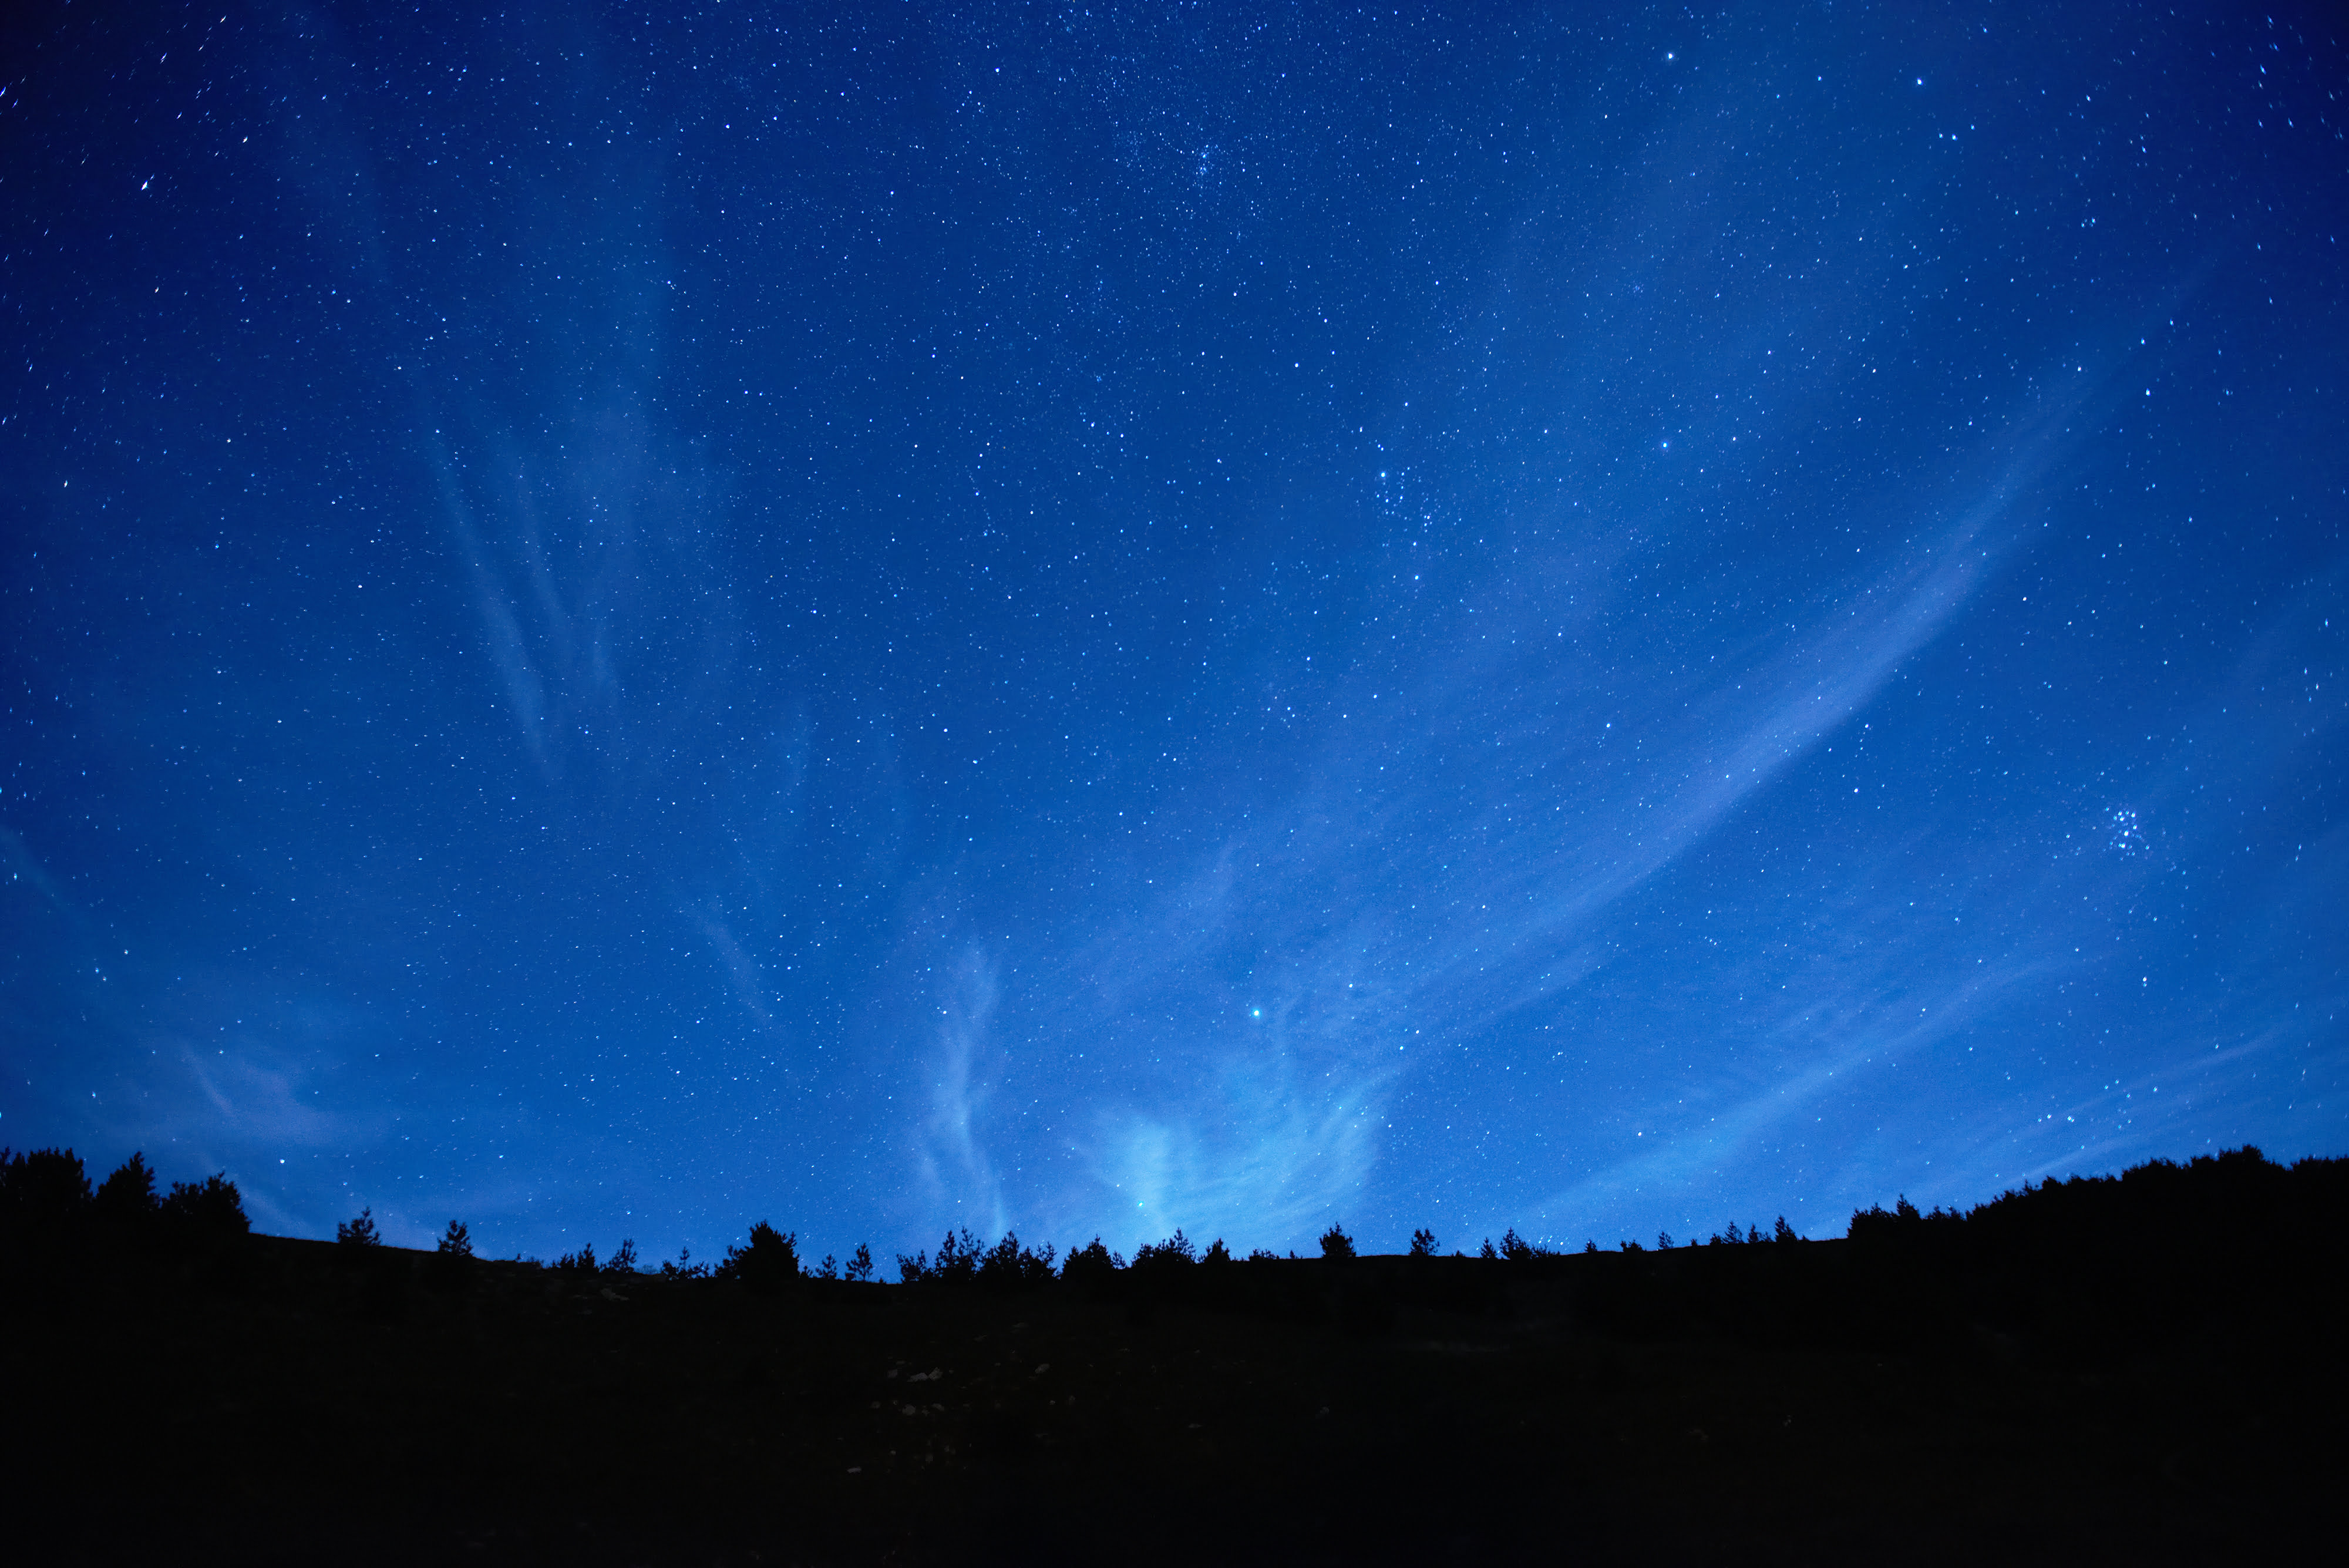 A horizon showing an electric blue night sky with stars and a line of trees seen as a black shadow in front